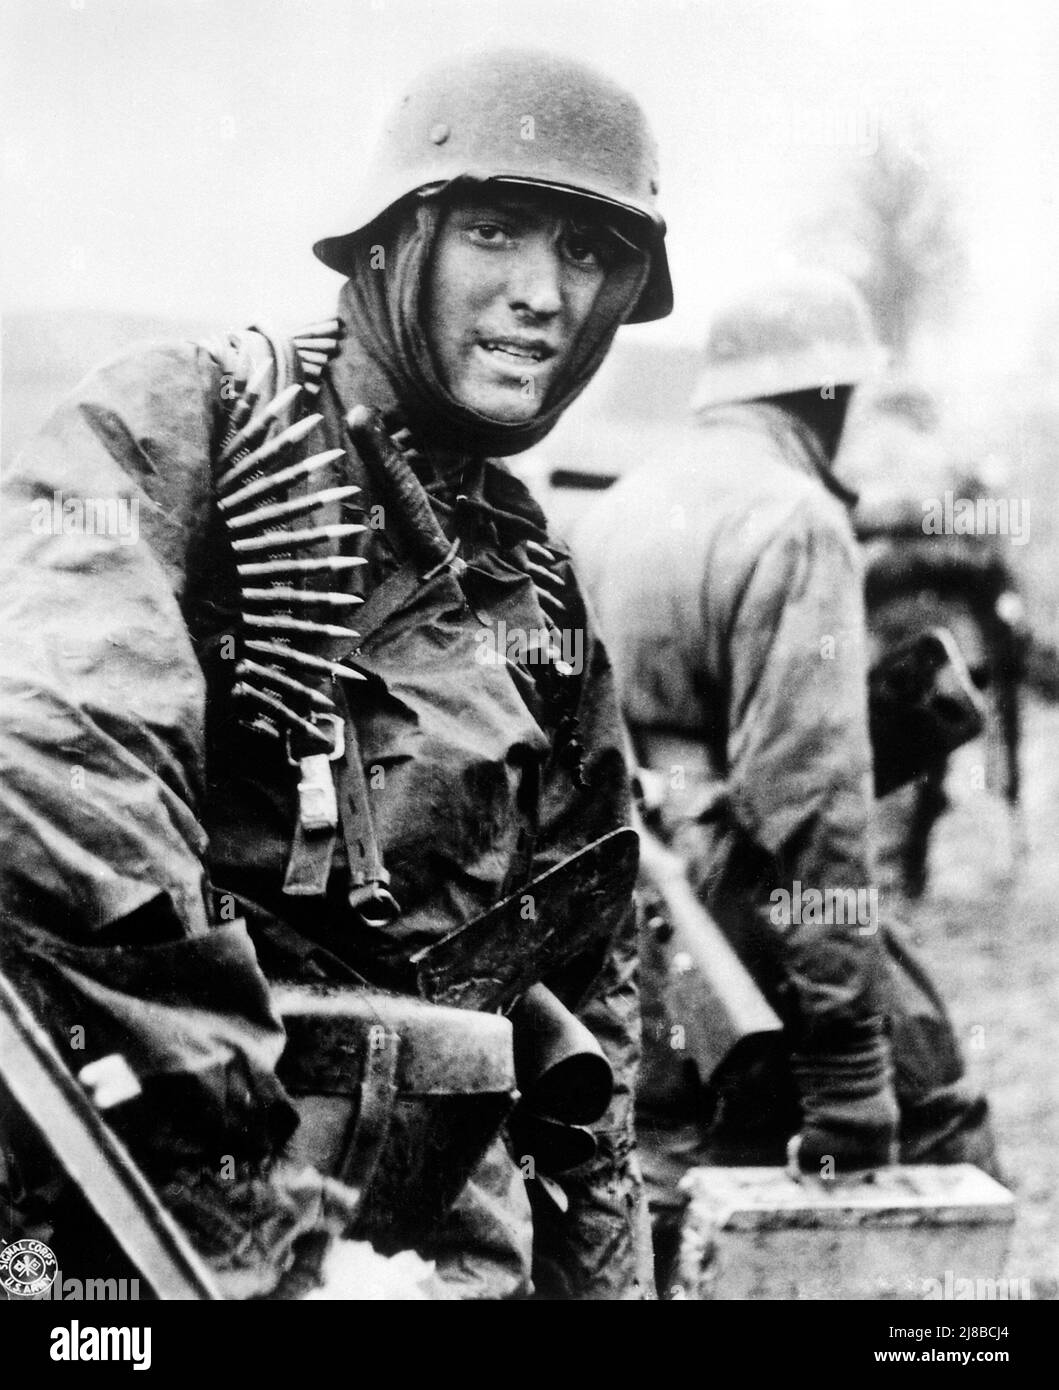 German machine gunner marching through the Ardennes in the Battle of the Bulge. Stock Photo